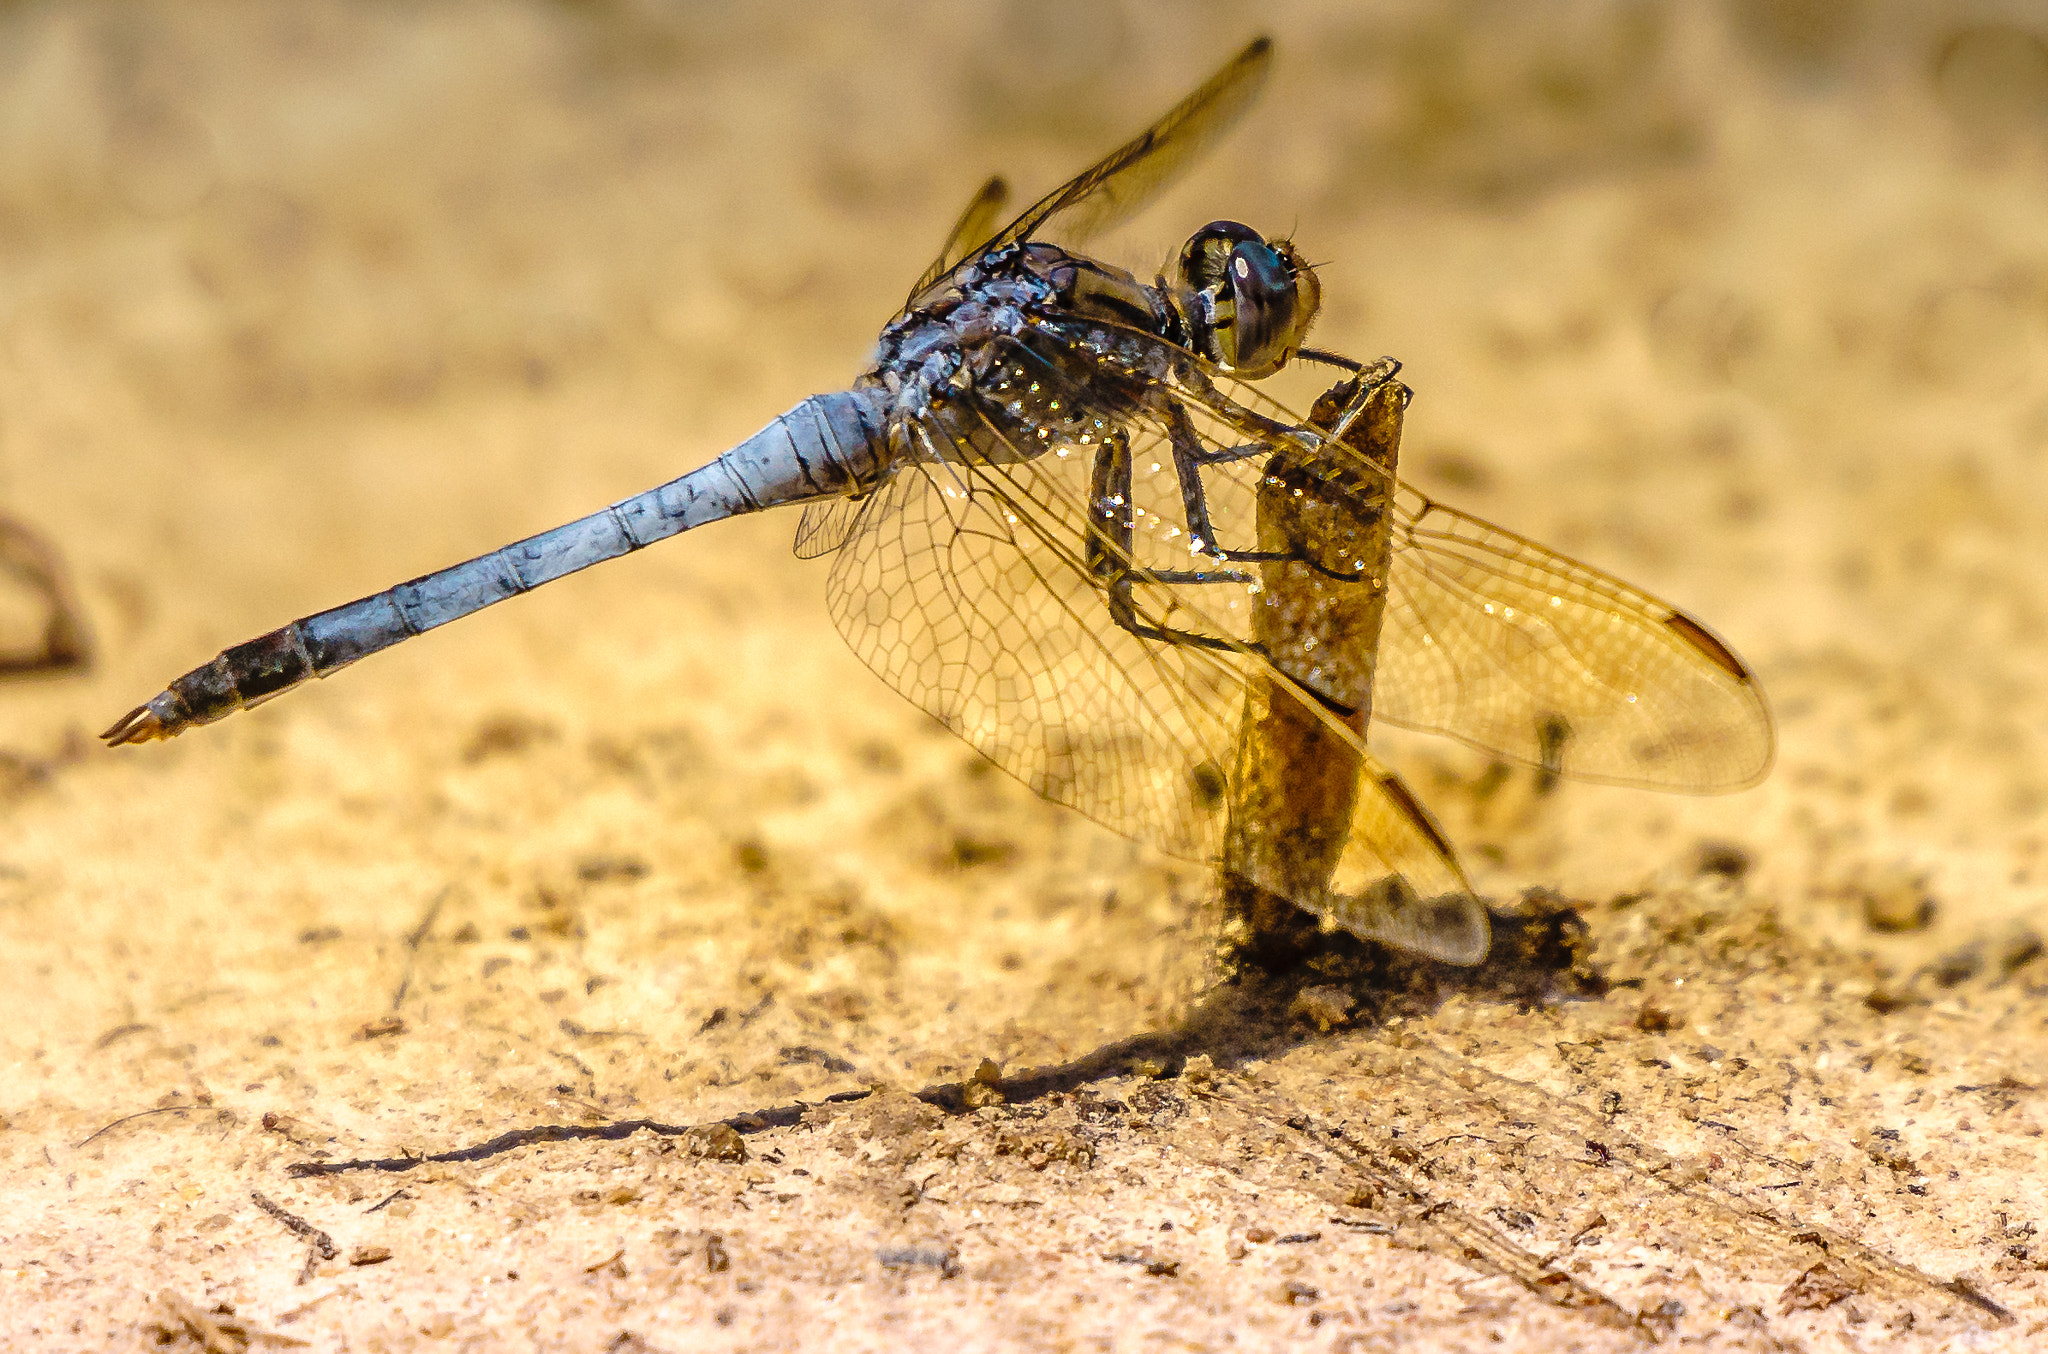 Sony a7 + Sigma 150-500mm F5-6.3 DG OS HSM sample photo. Dragonfly photography